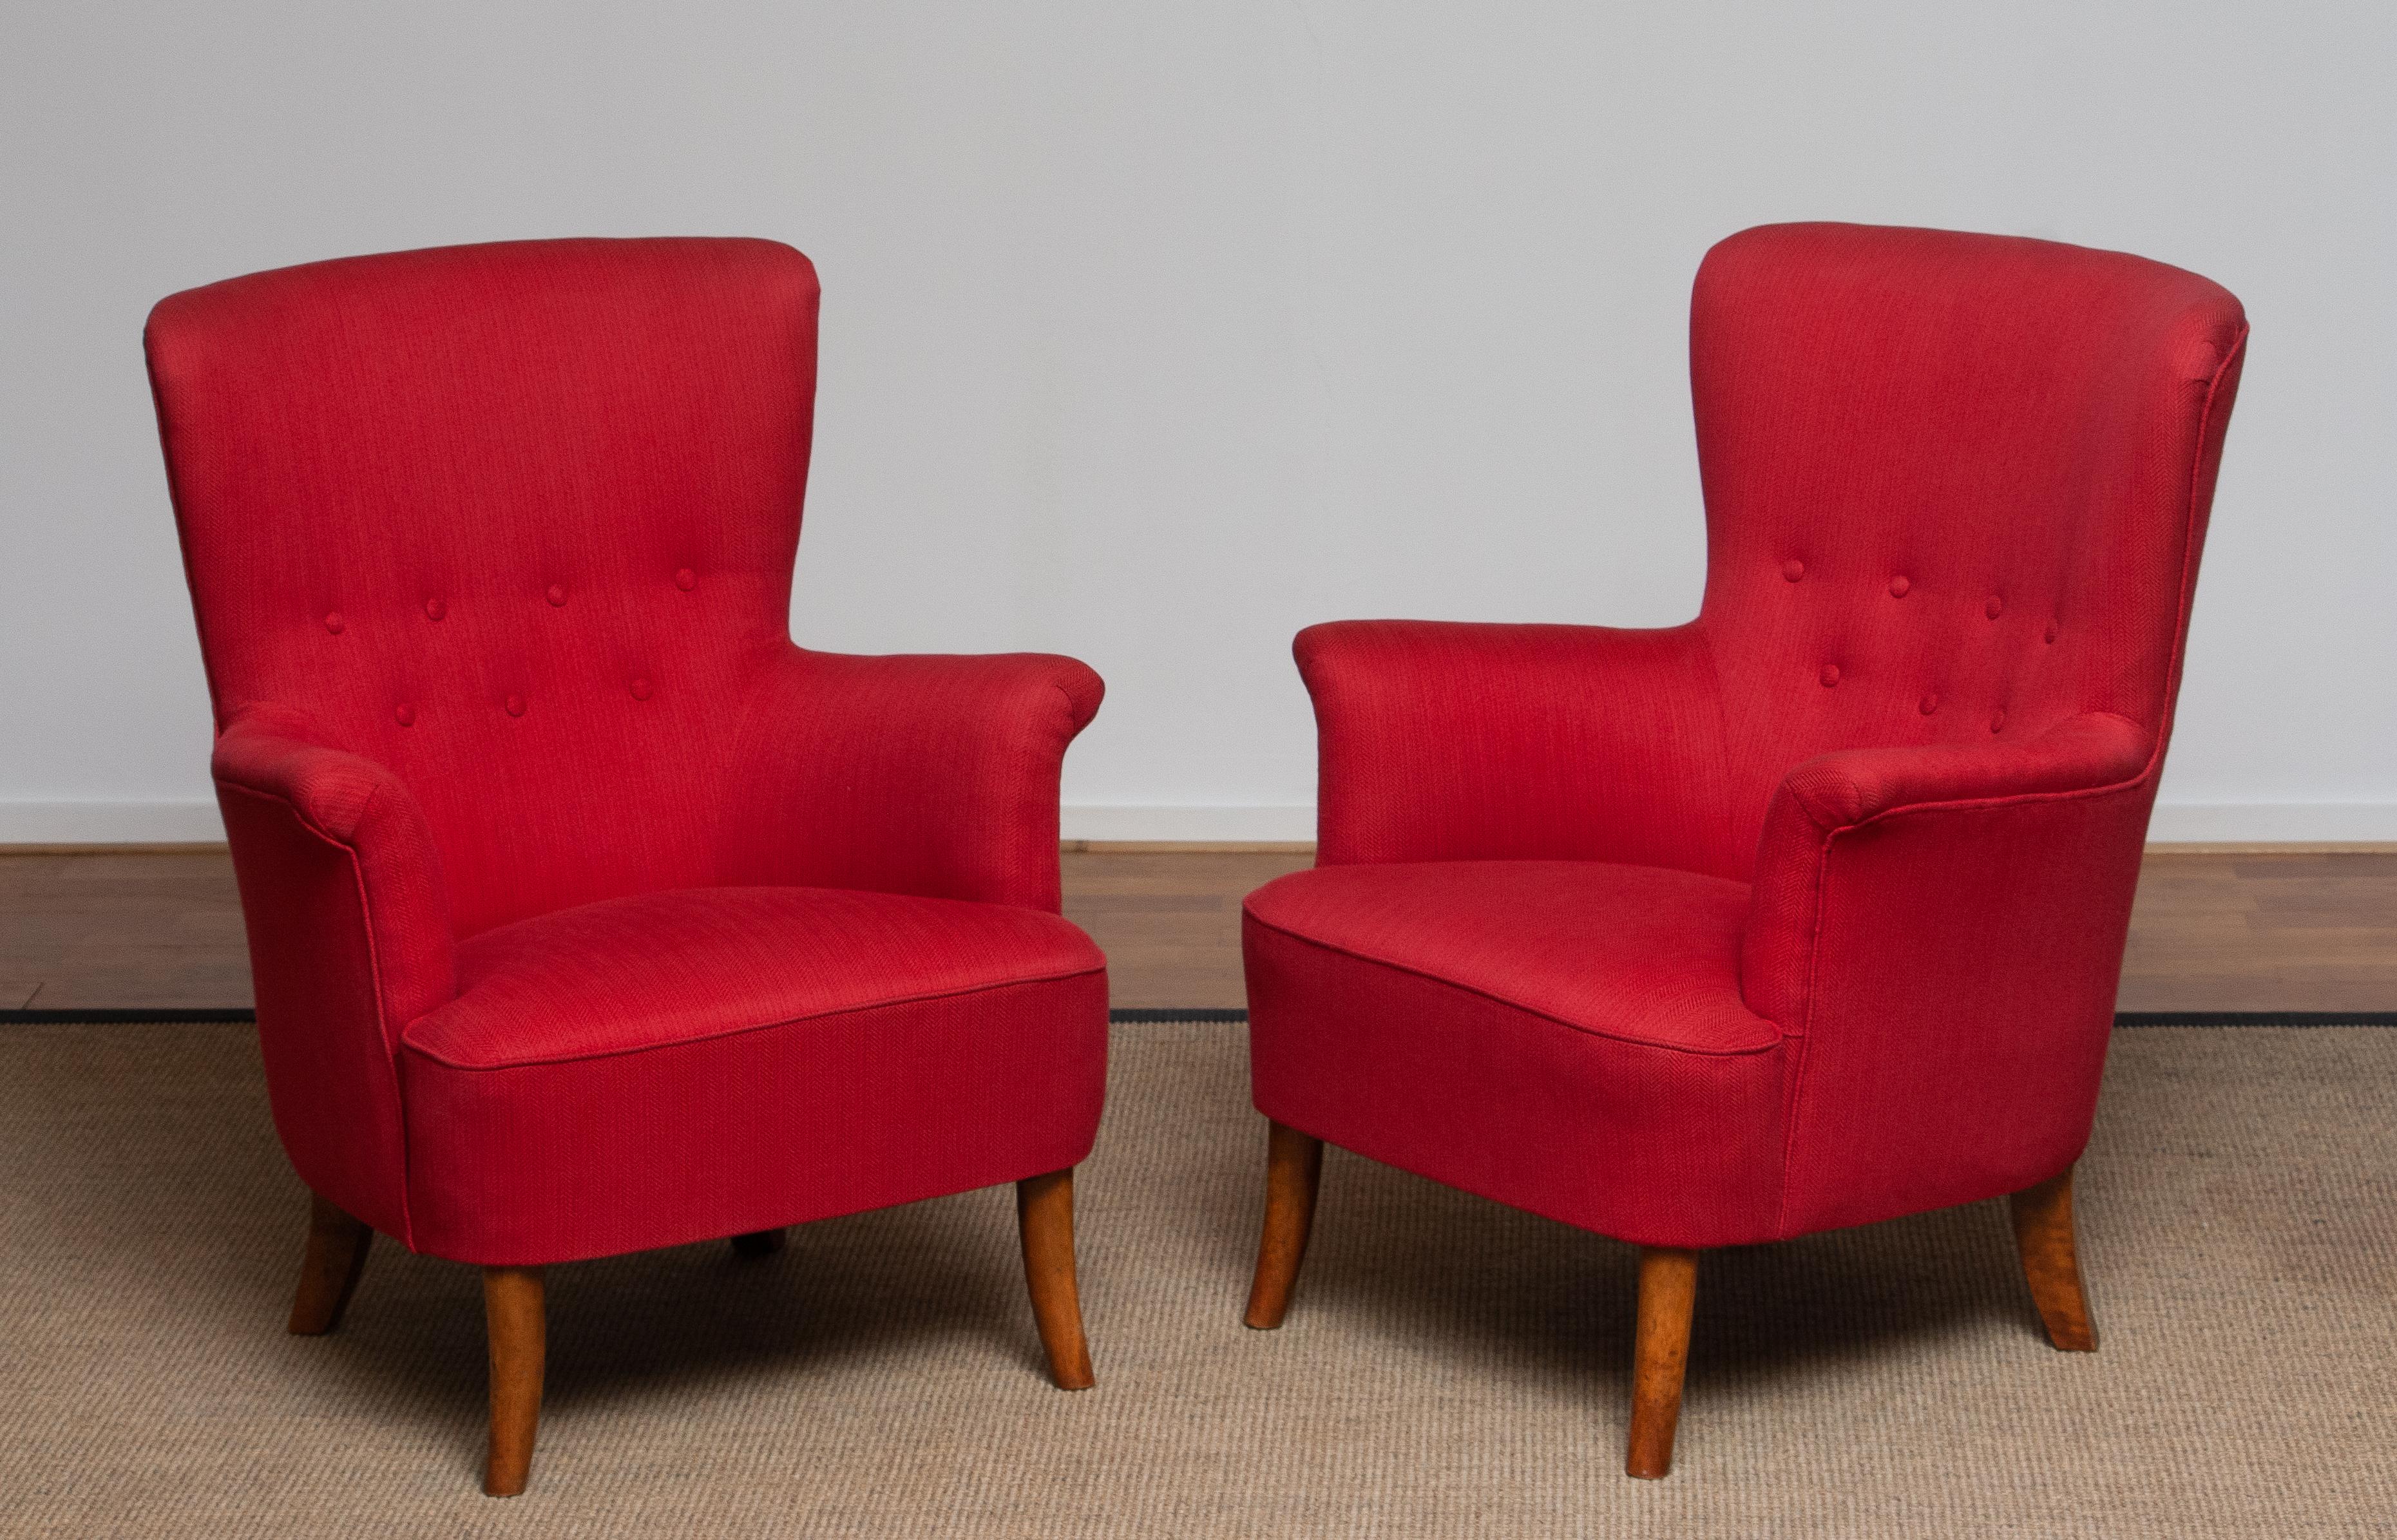 Mid-20th Century 1940s, Pair of Fuchsia Easy or Lounge Chair by Carl Malmsten for OH Sjogren